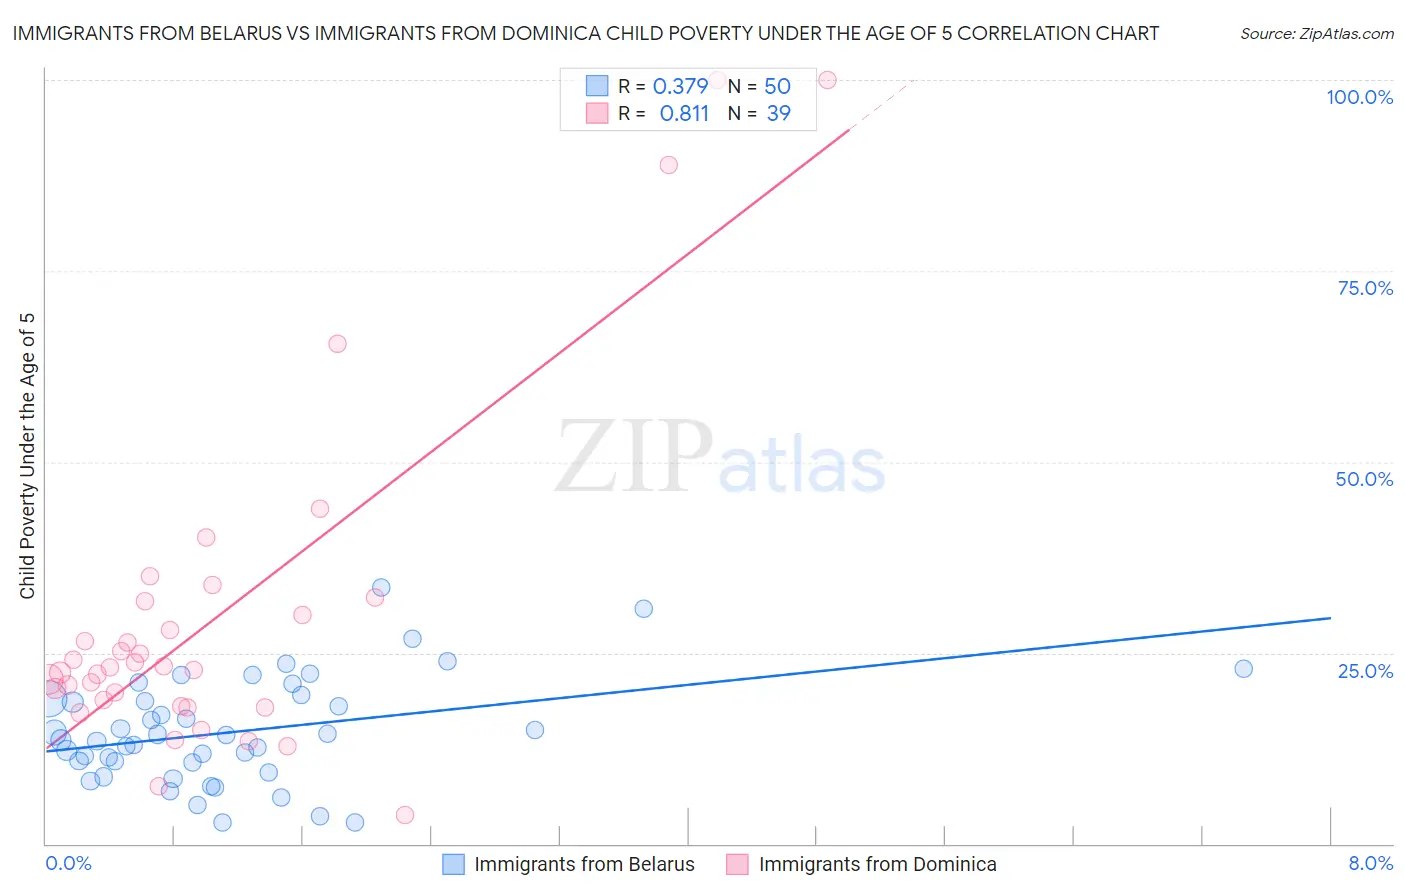 Immigrants from Belarus vs Immigrants from Dominica Child Poverty Under the Age of 5